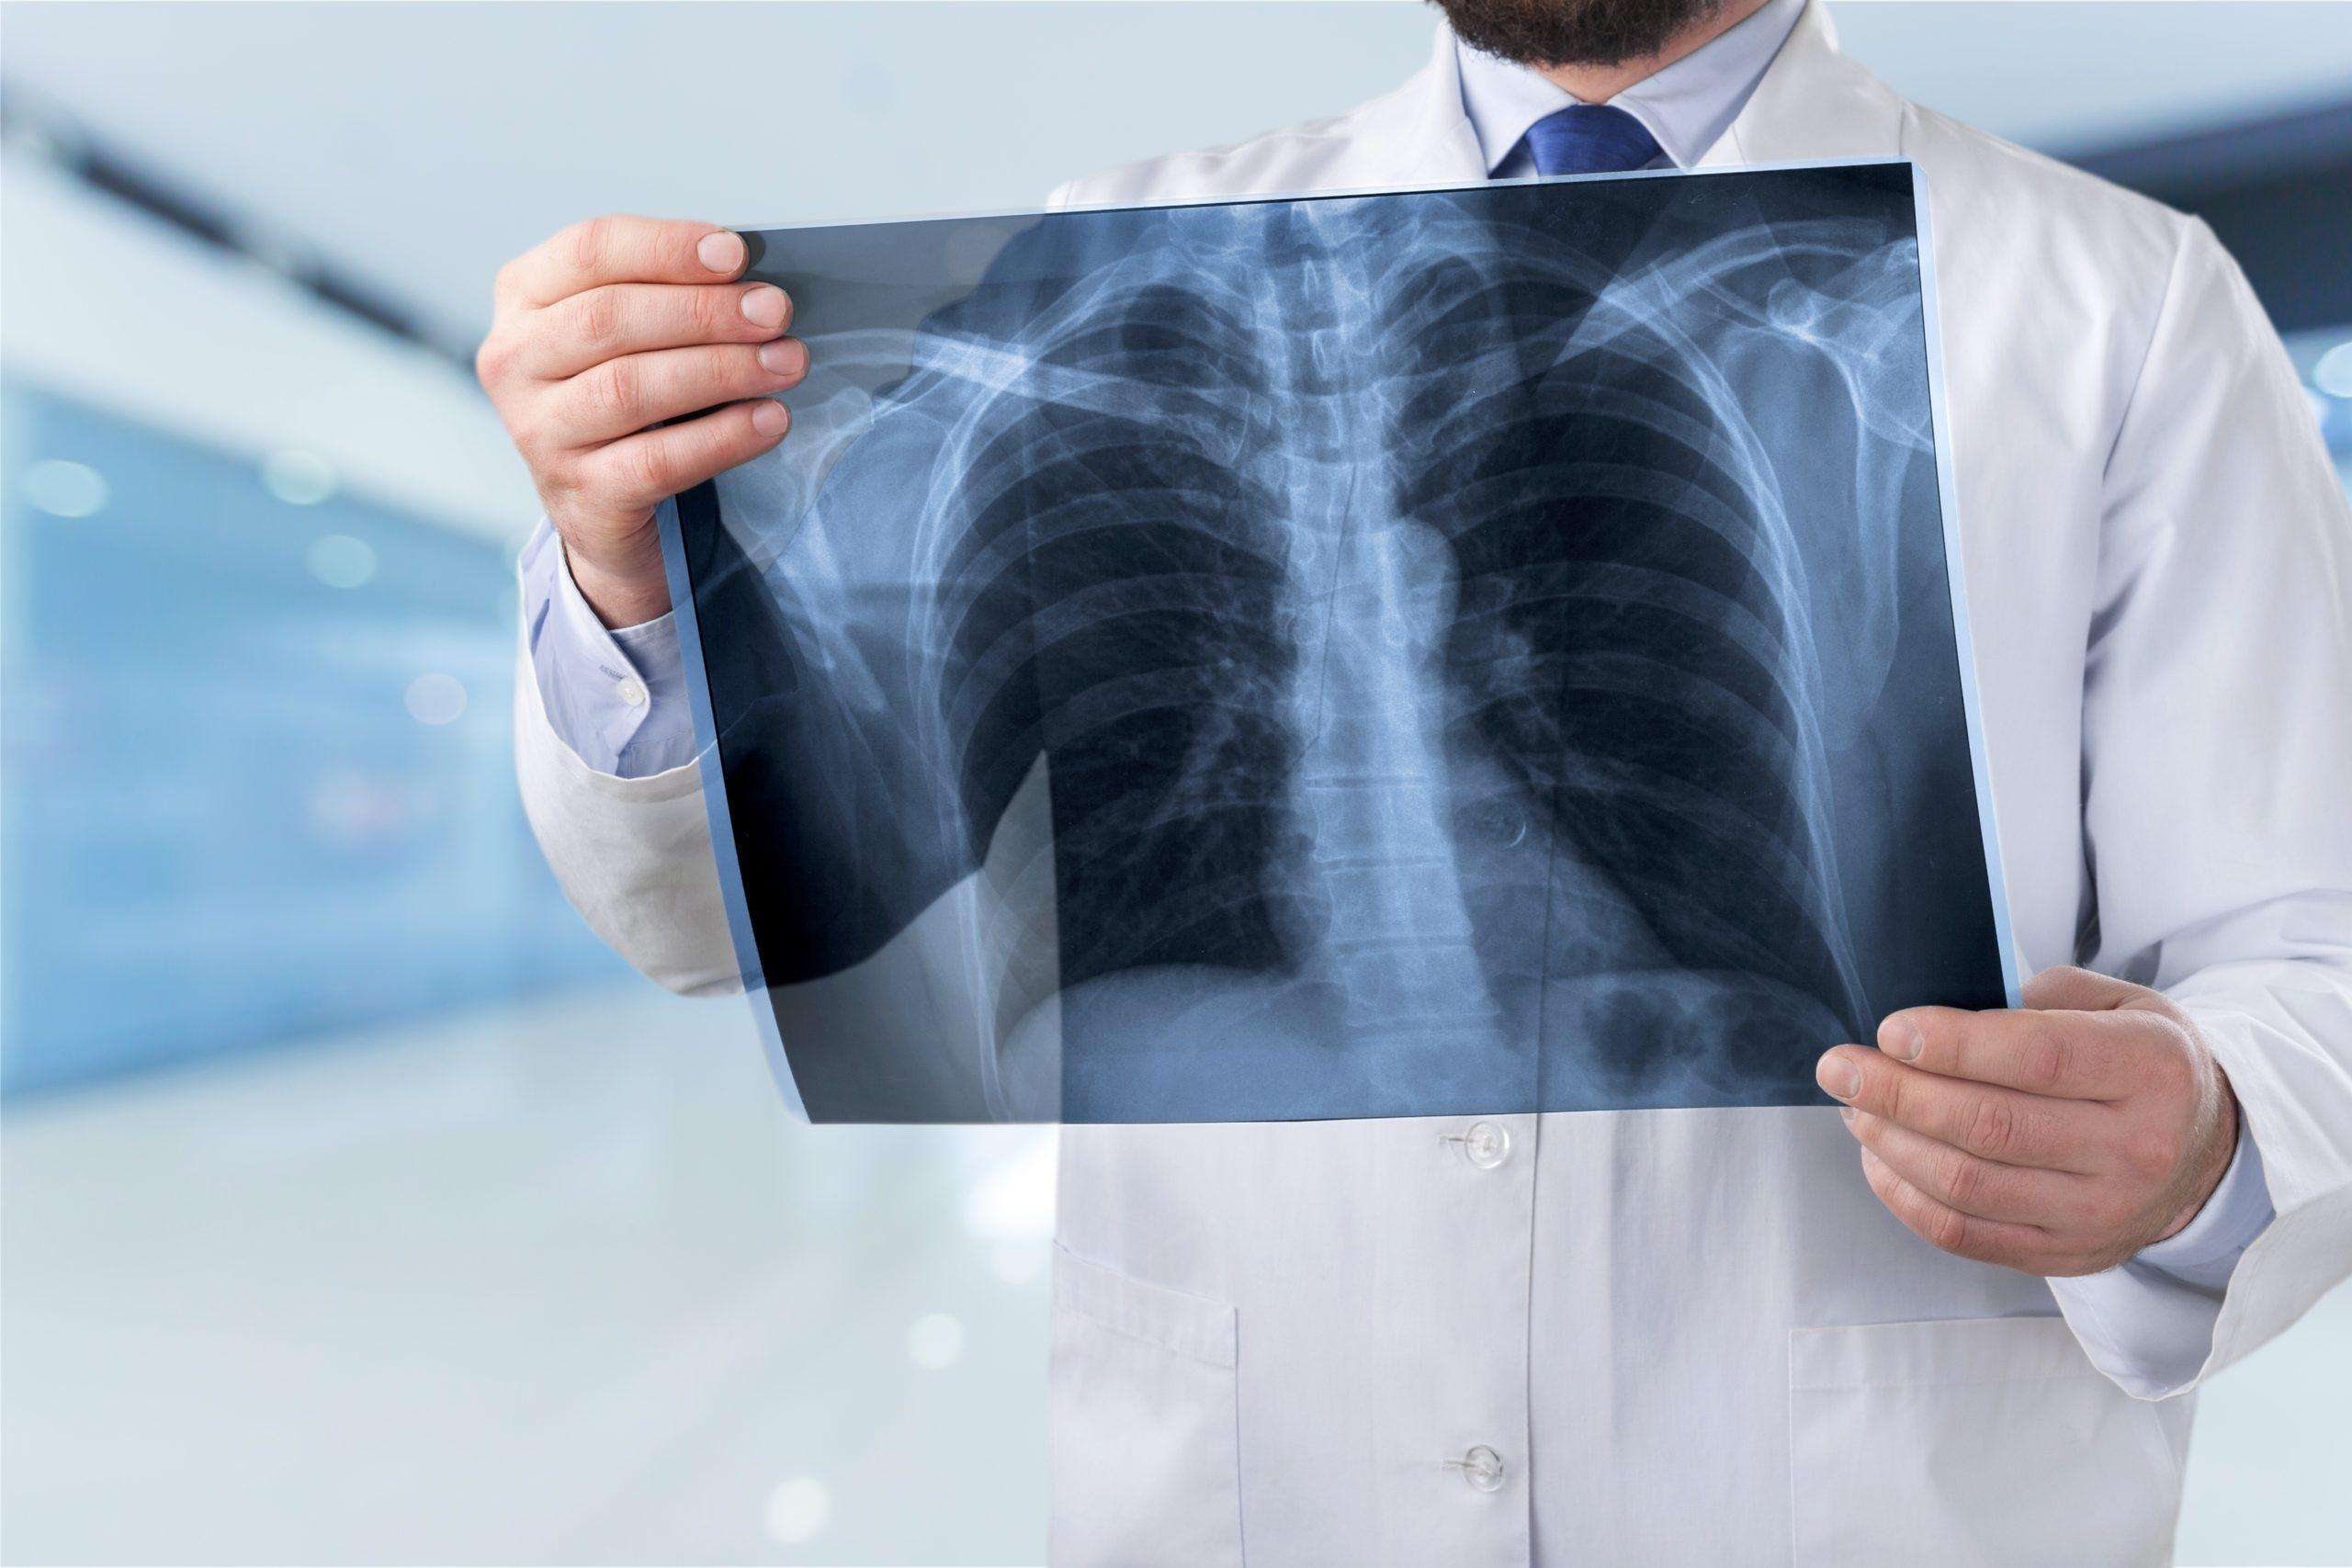 How Do Doctors Check for Mesothelioma Lung Cancer?